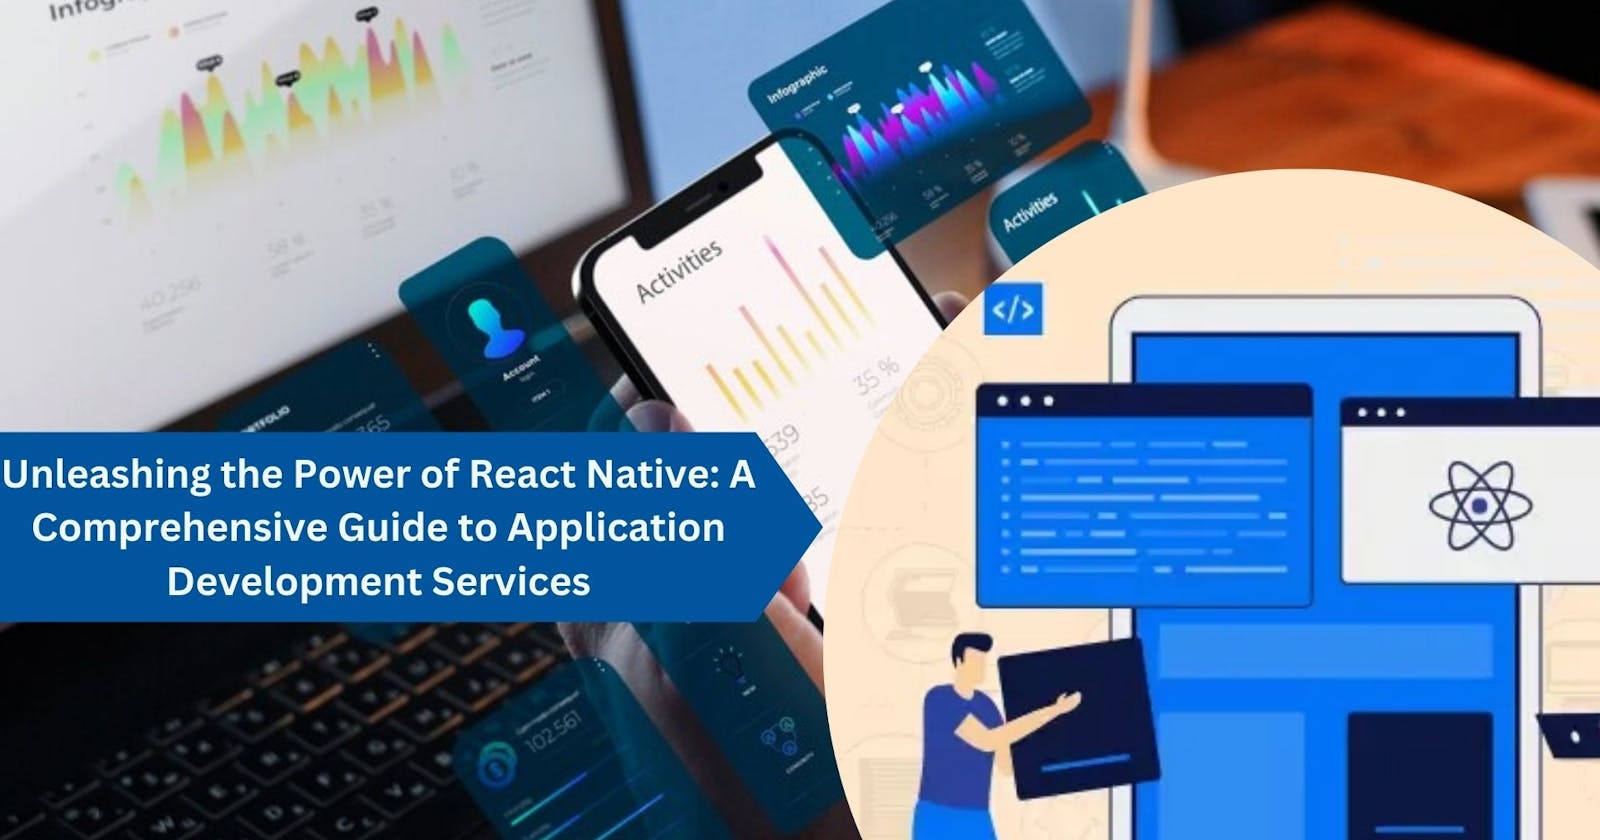 Unleashing the Power of React Native: A Comprehensive Guide to Application Development Services